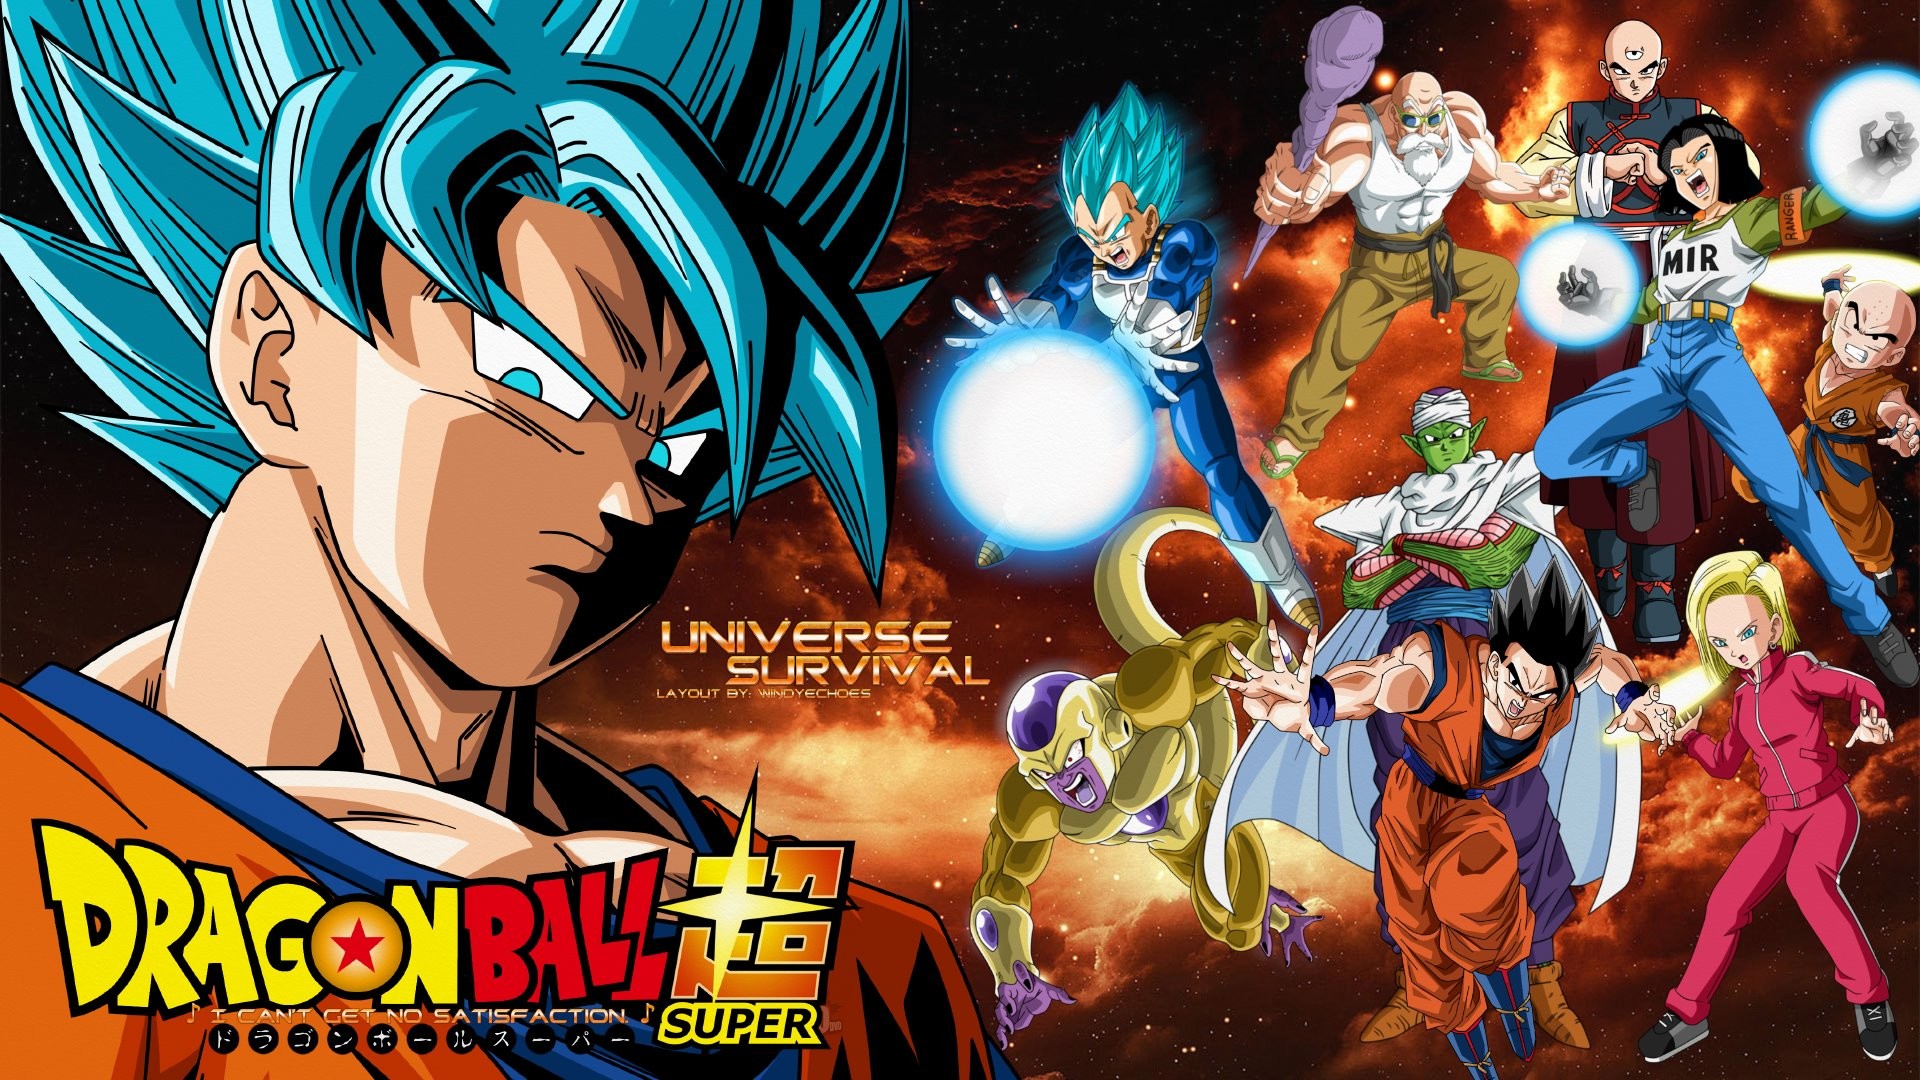 1920x1080 ... Dragon Ball Super - Universe 7 Survival Wallpaper by WindyEchoes